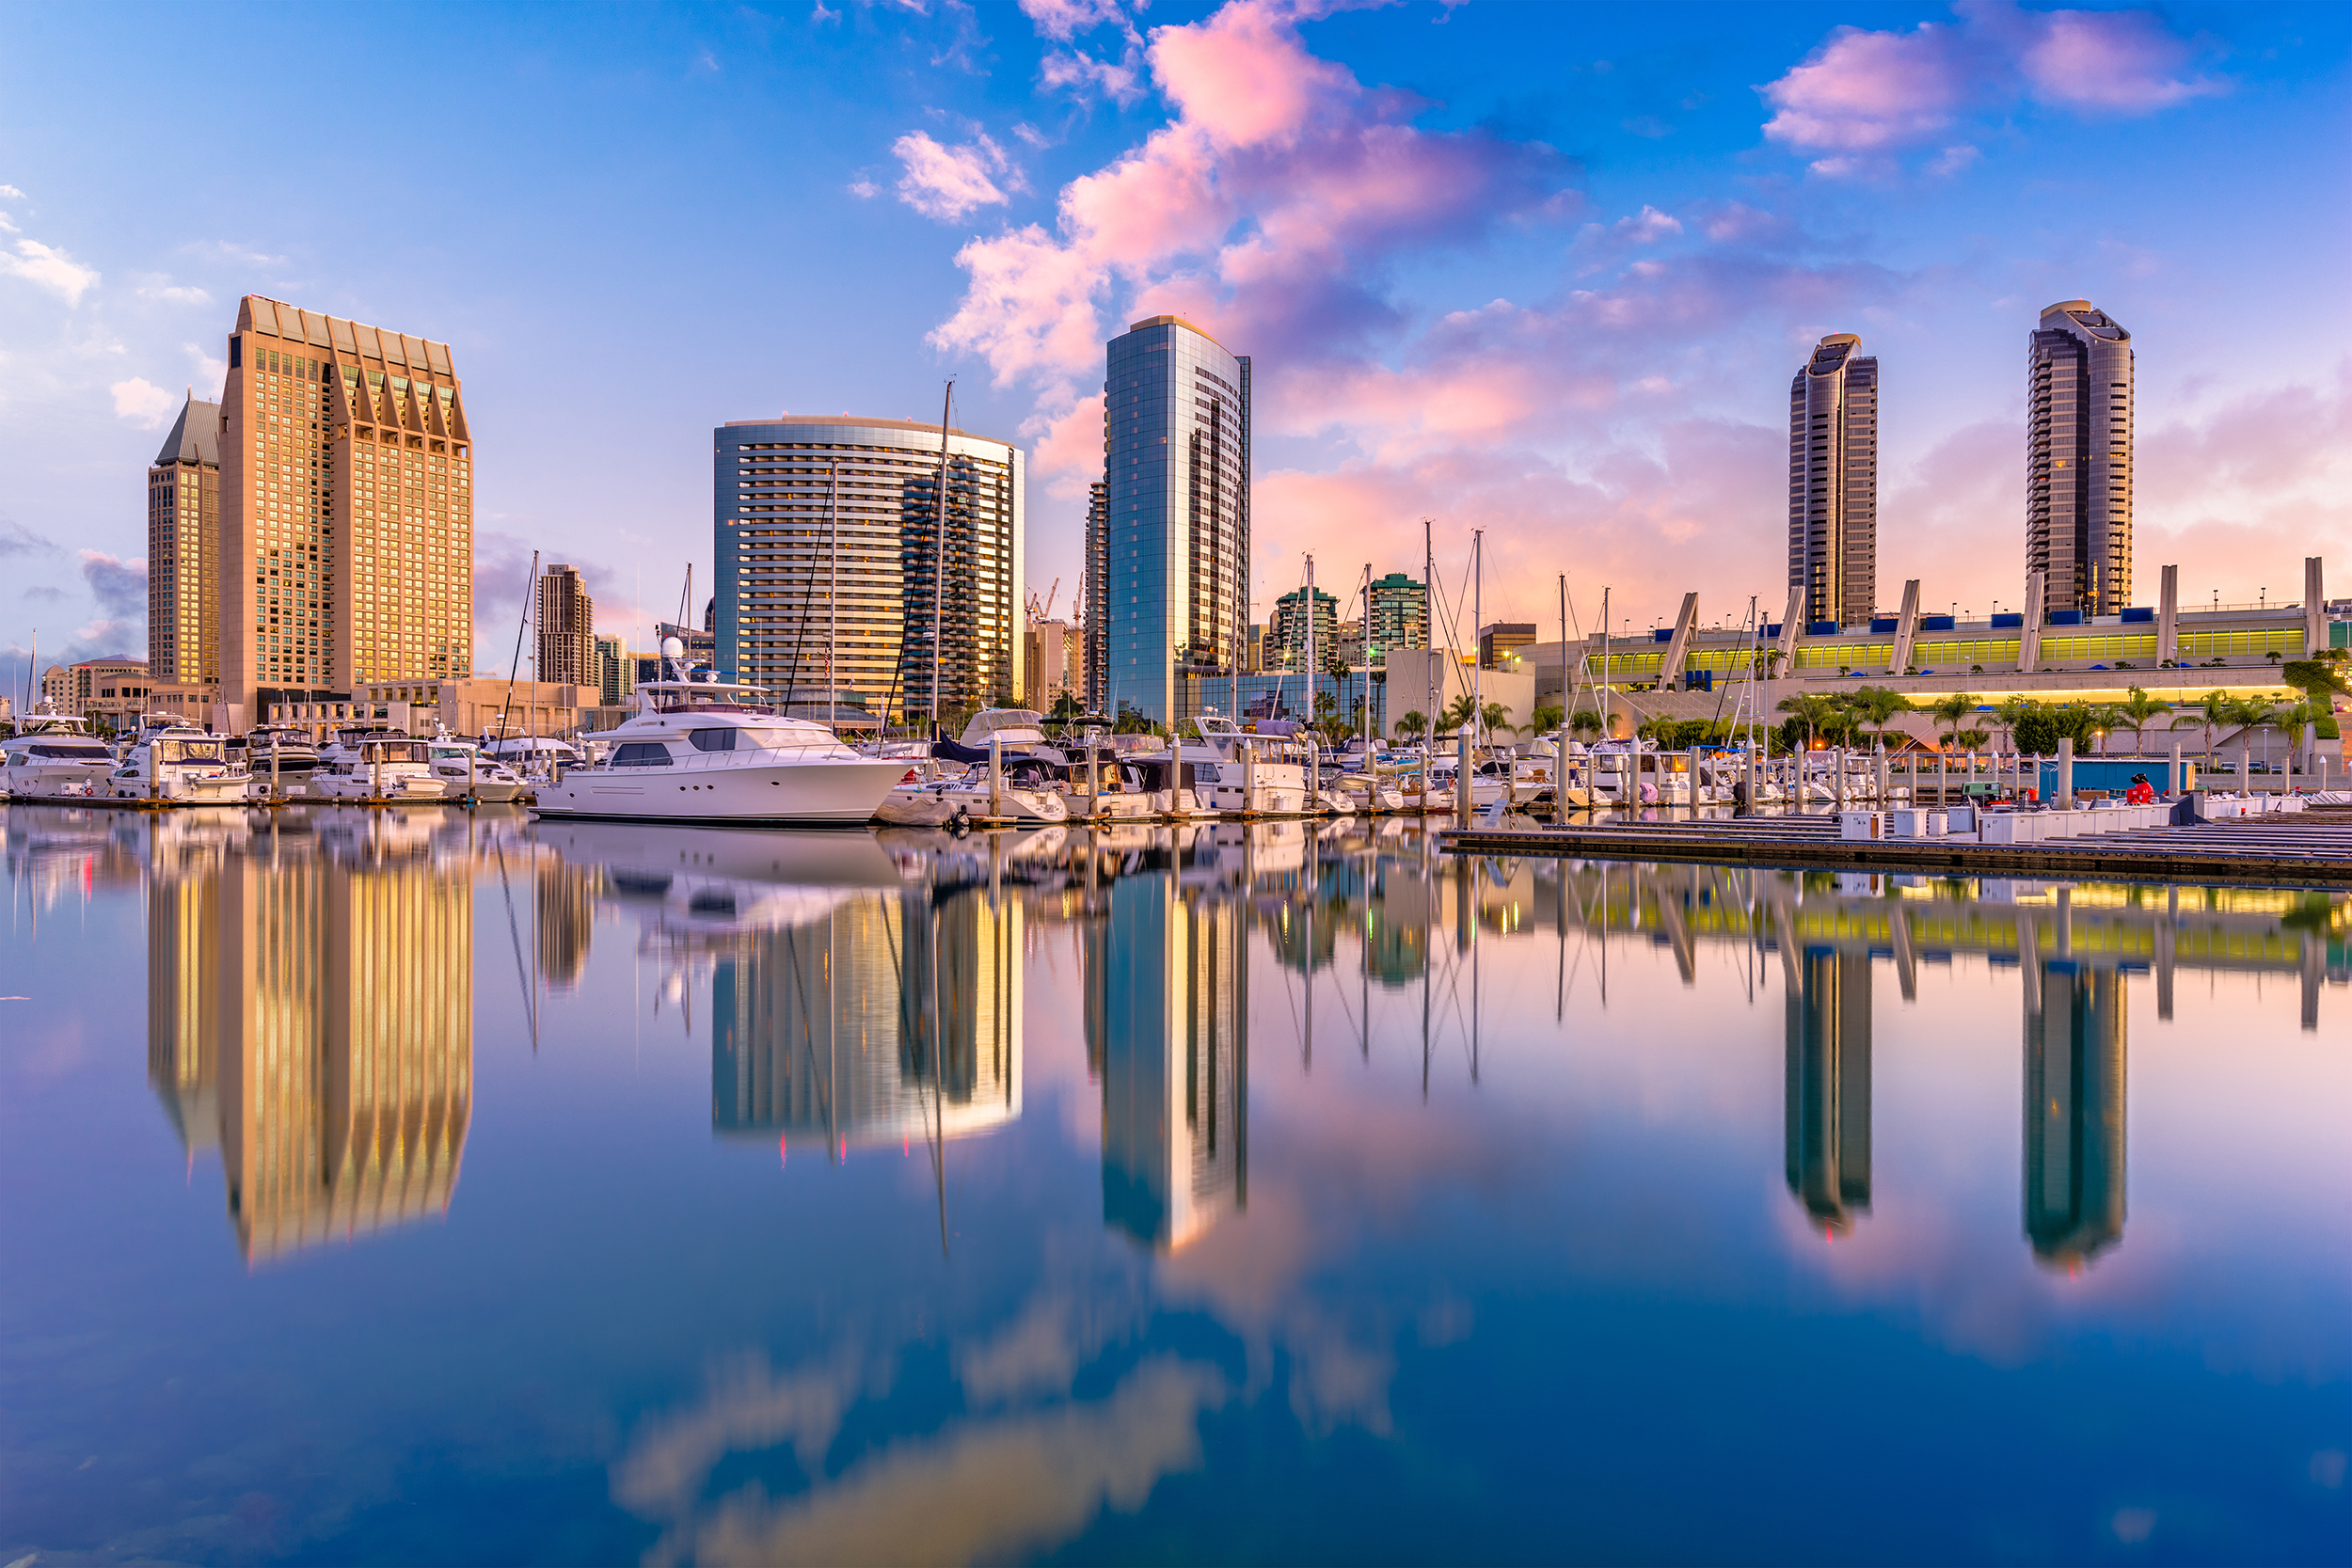 San Diego skyline reflected in the water, showcasing the stunning cityscape.